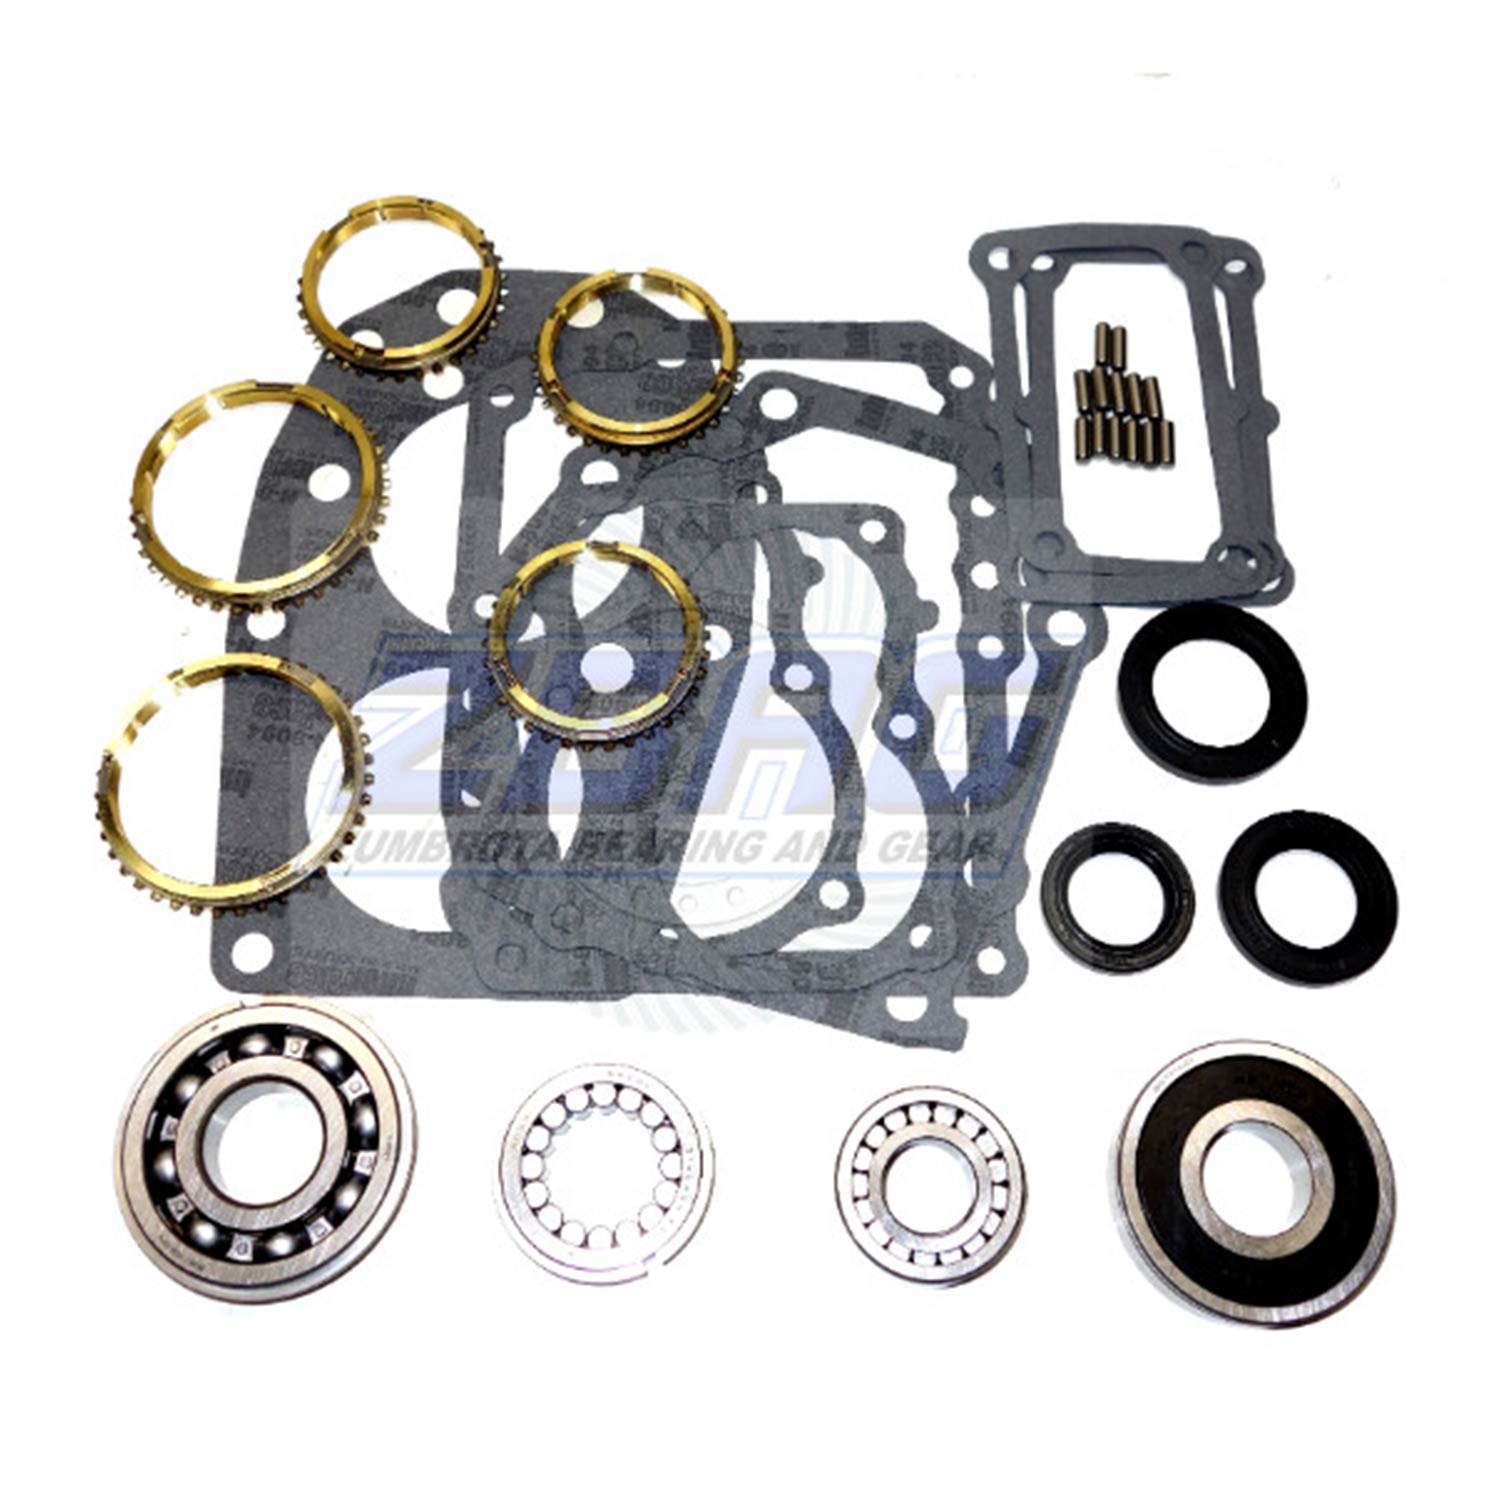 USA Standard 71019 Manual Transmission Bearing Kit, 1985 & Newer Toyota With Synchro'S